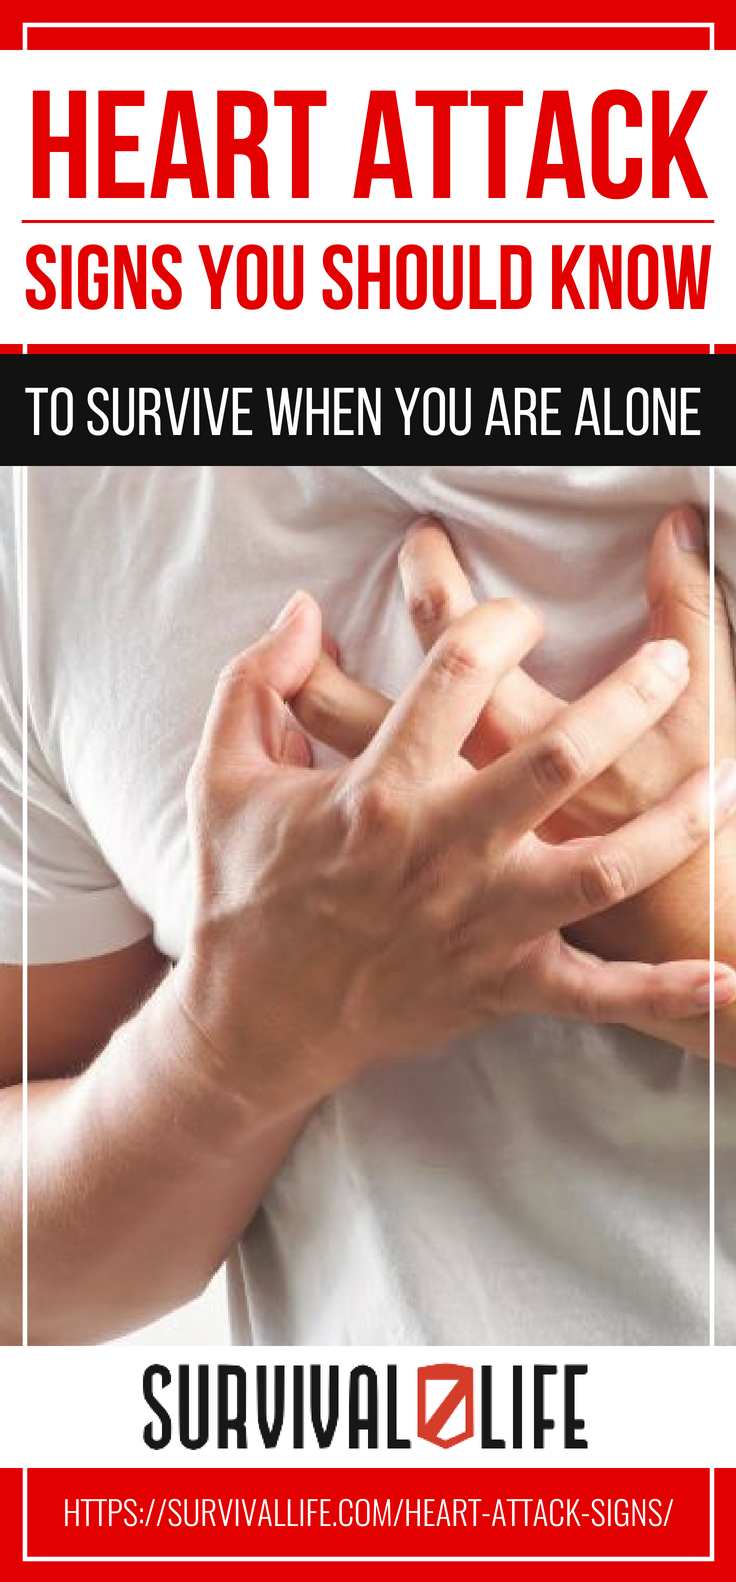 Heart Attack Signs You Should Know To Survive When You Are Alone | https://survivallife.com/heart-attack-signs/ 